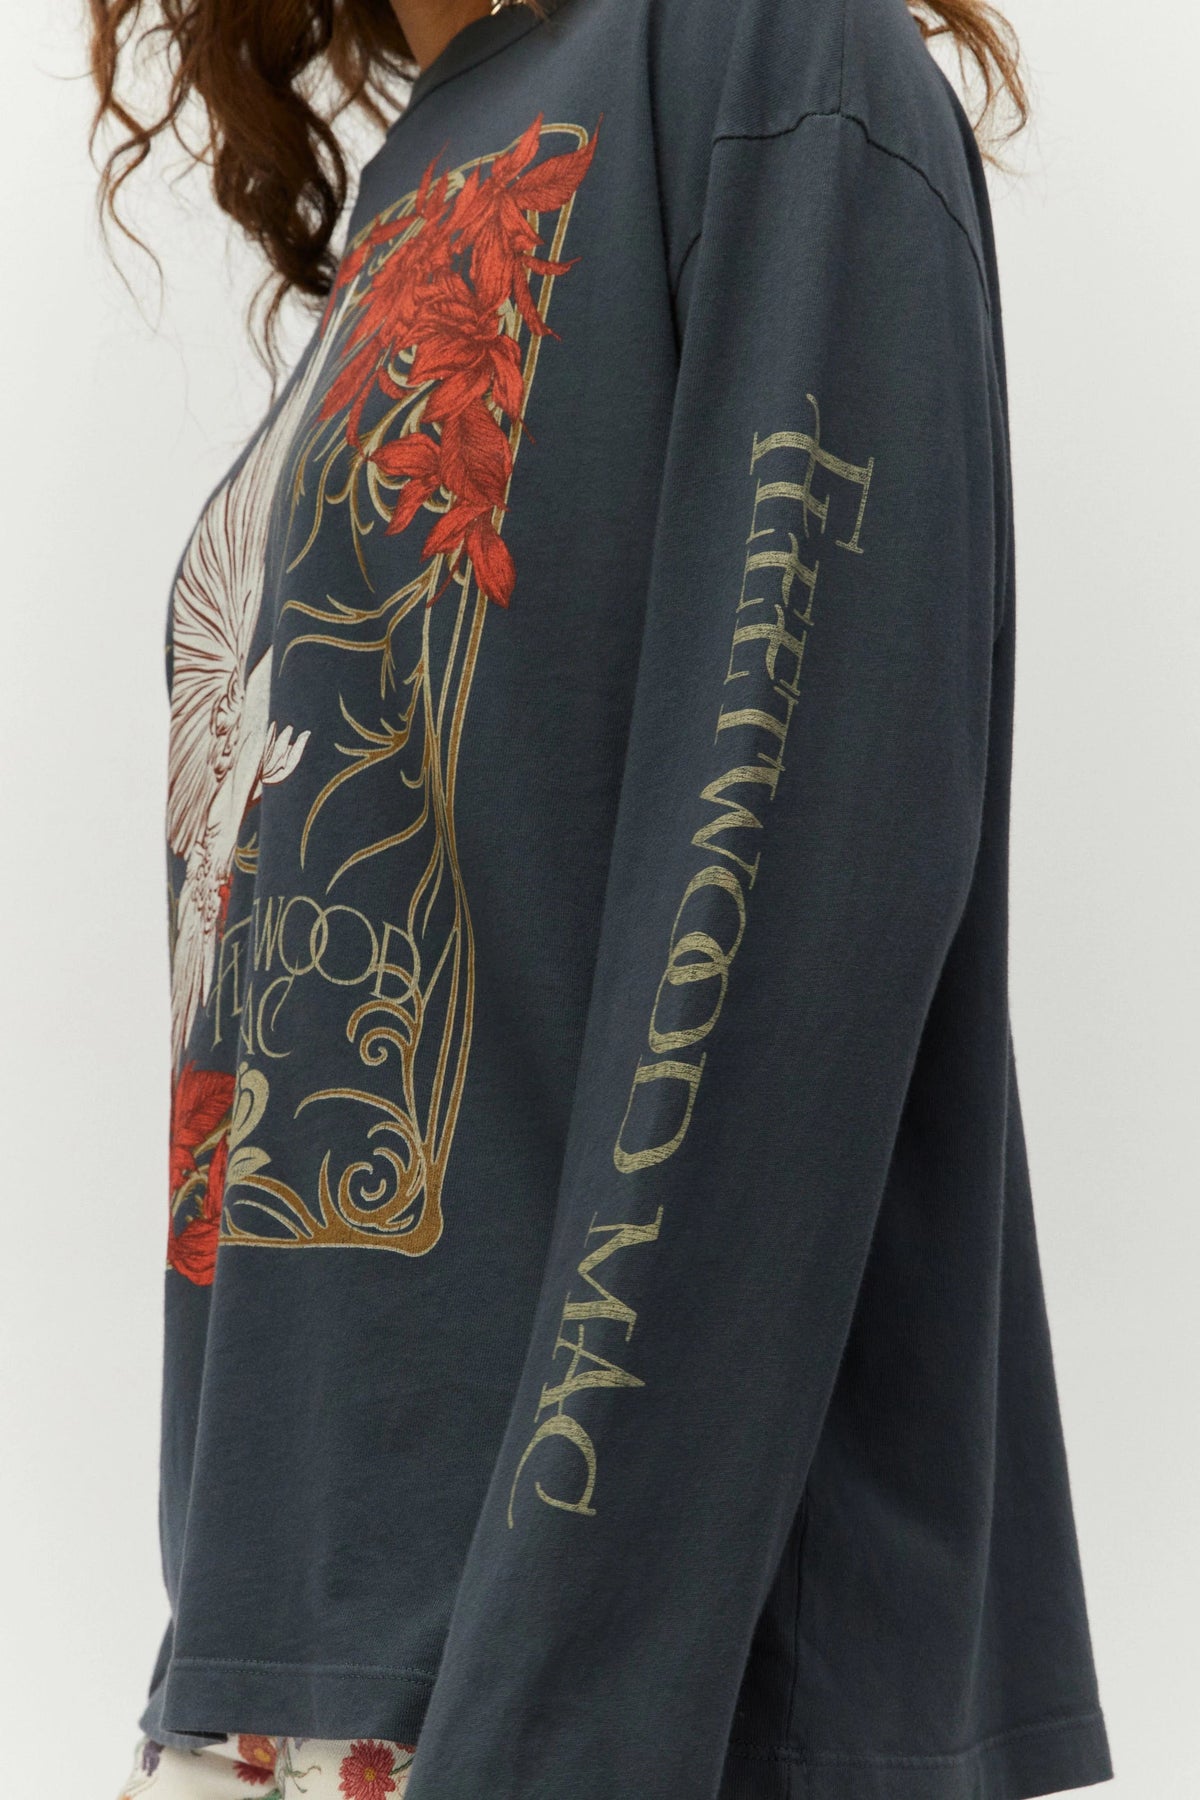 DAYDREAMER Fleetwood Mac Dove Oversized Long Sleeve Tee Vintage Black - Graphic Tee - Blooming Daily